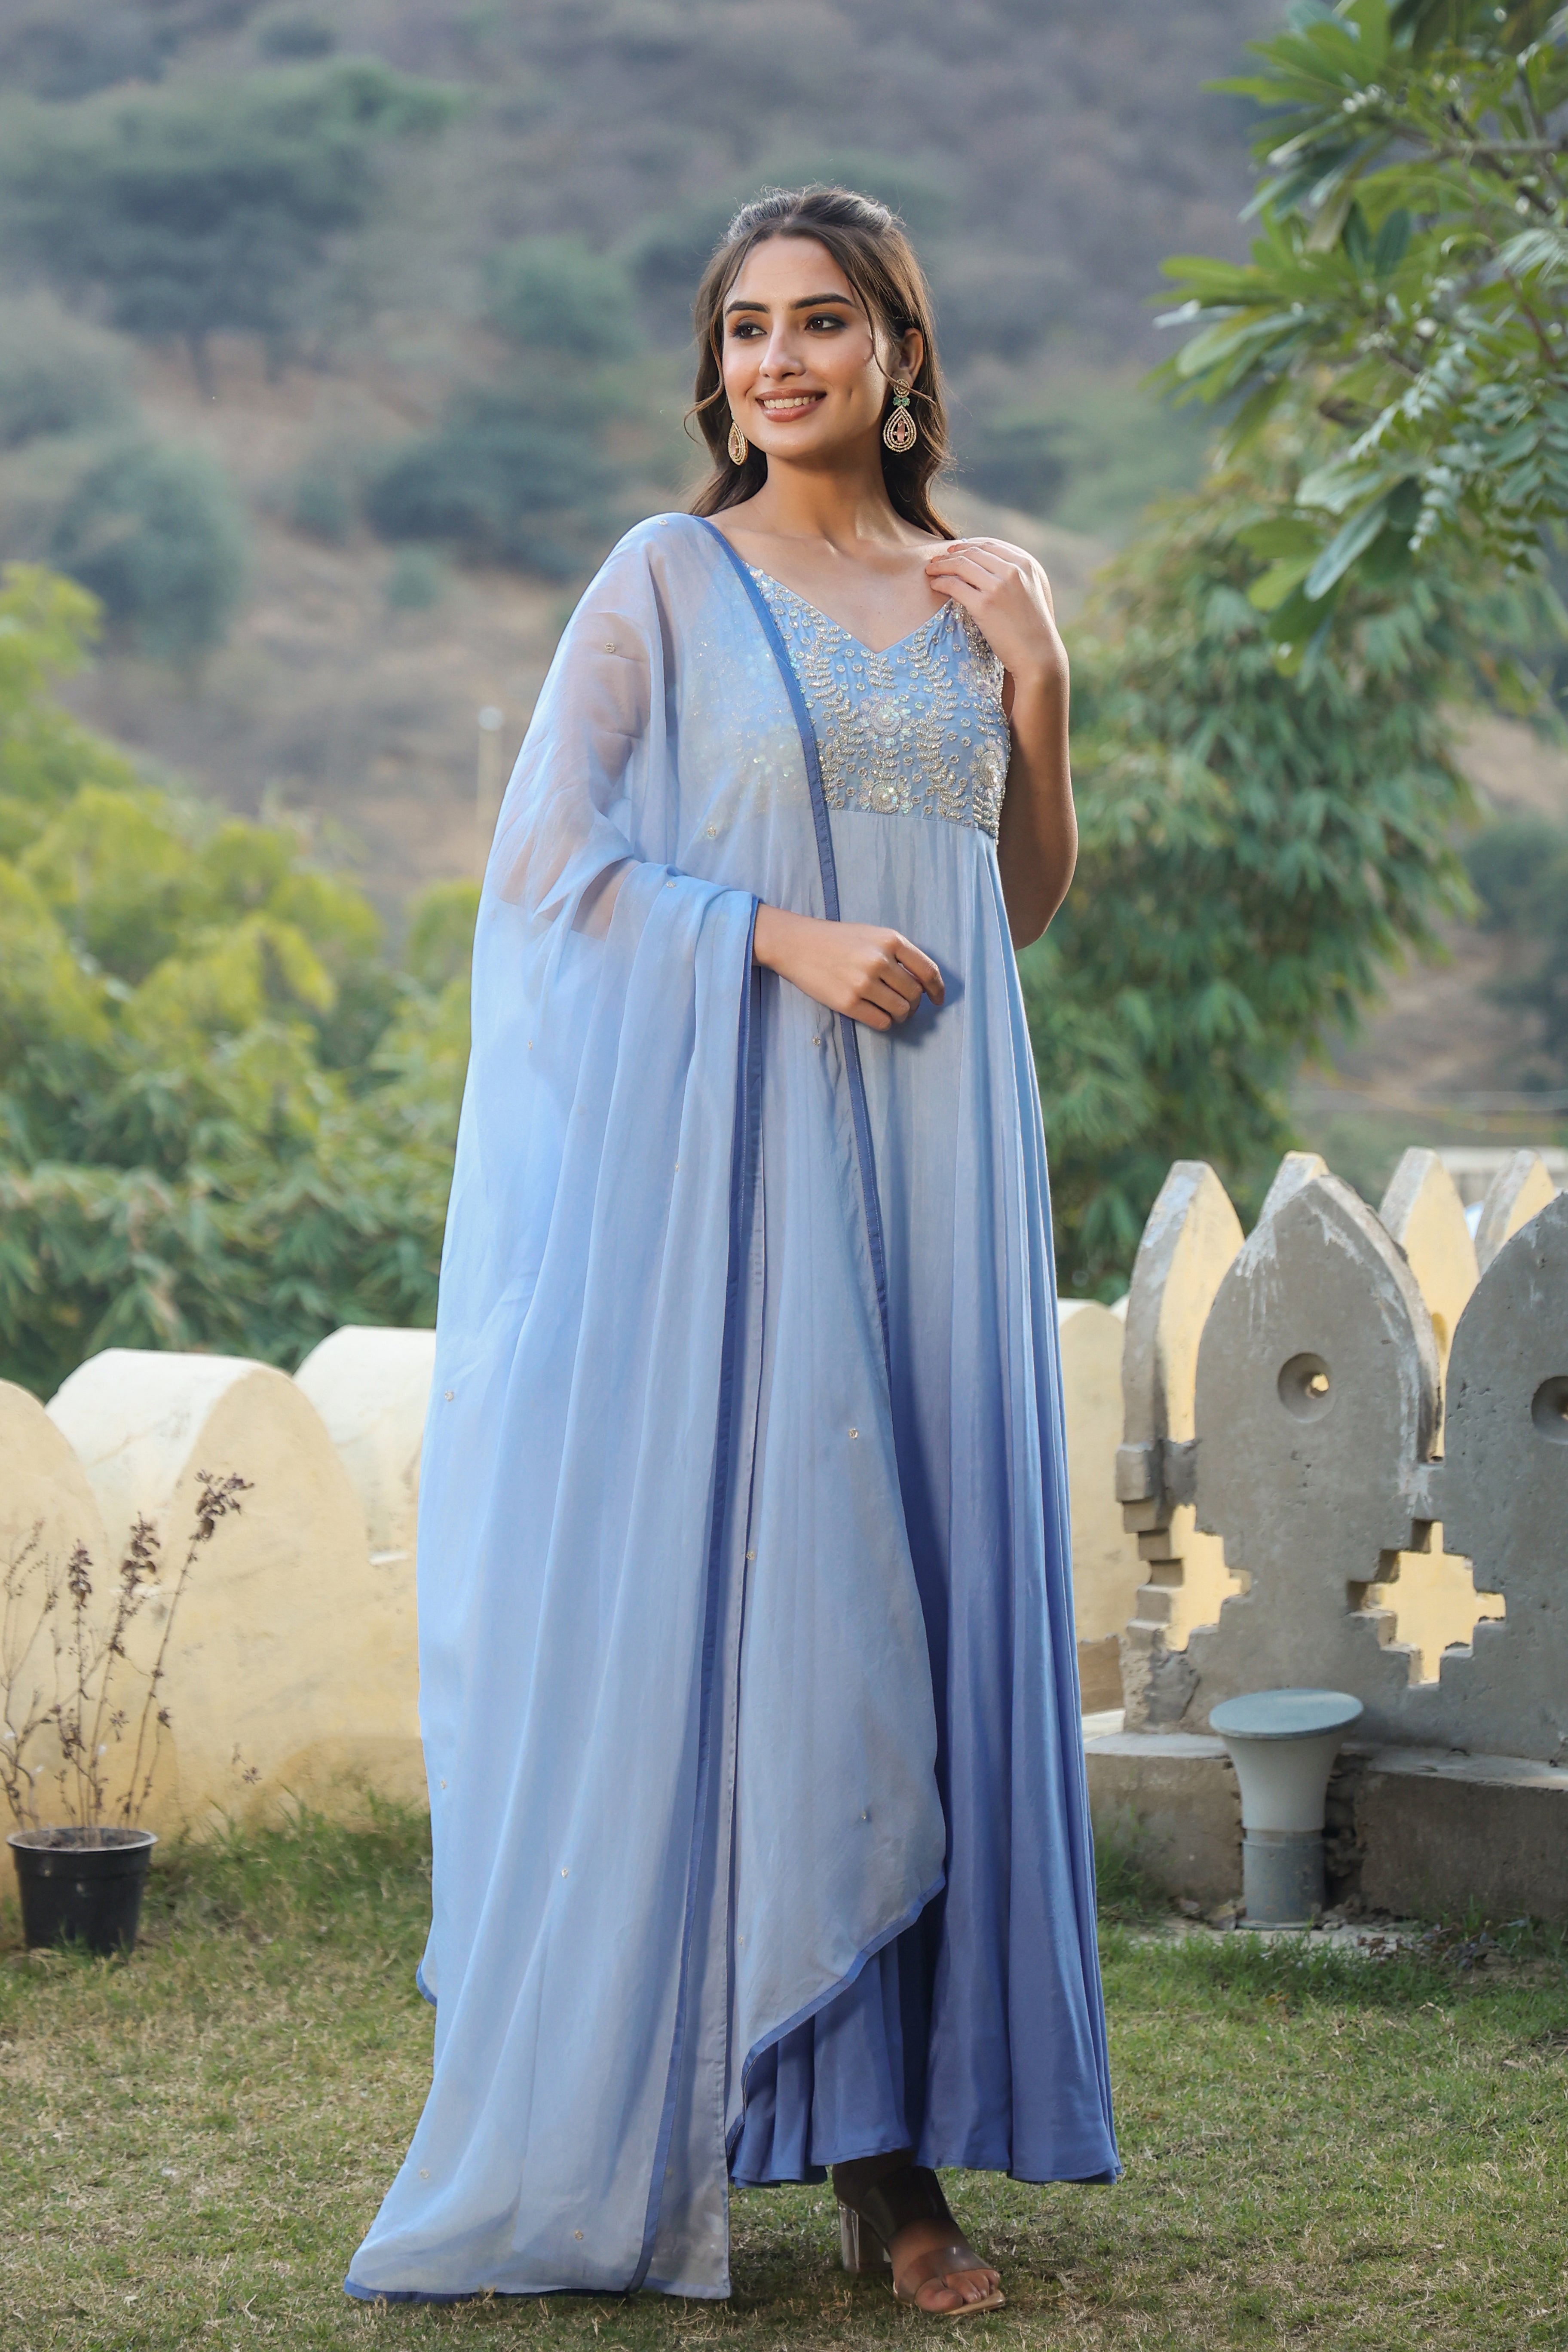 MUSLIN GOWN WITH DUPATTA